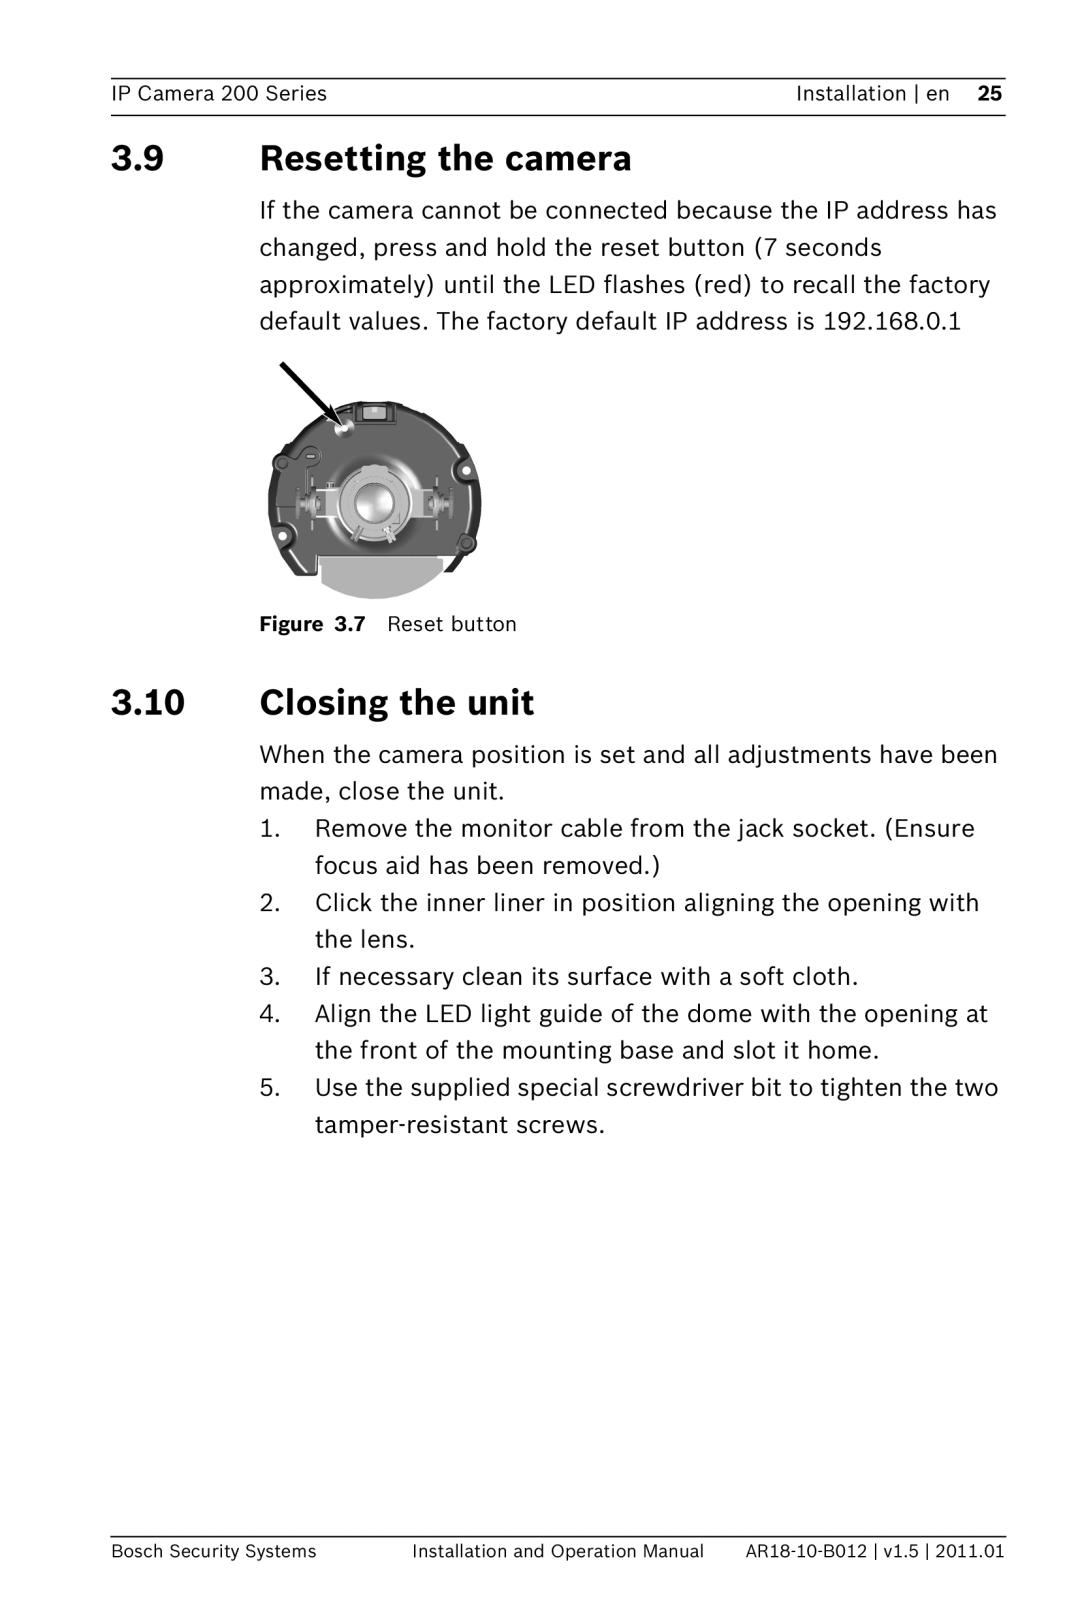 Bosch Appliances NDC-265-P operation manual Resetting the camera, Closing the unit 